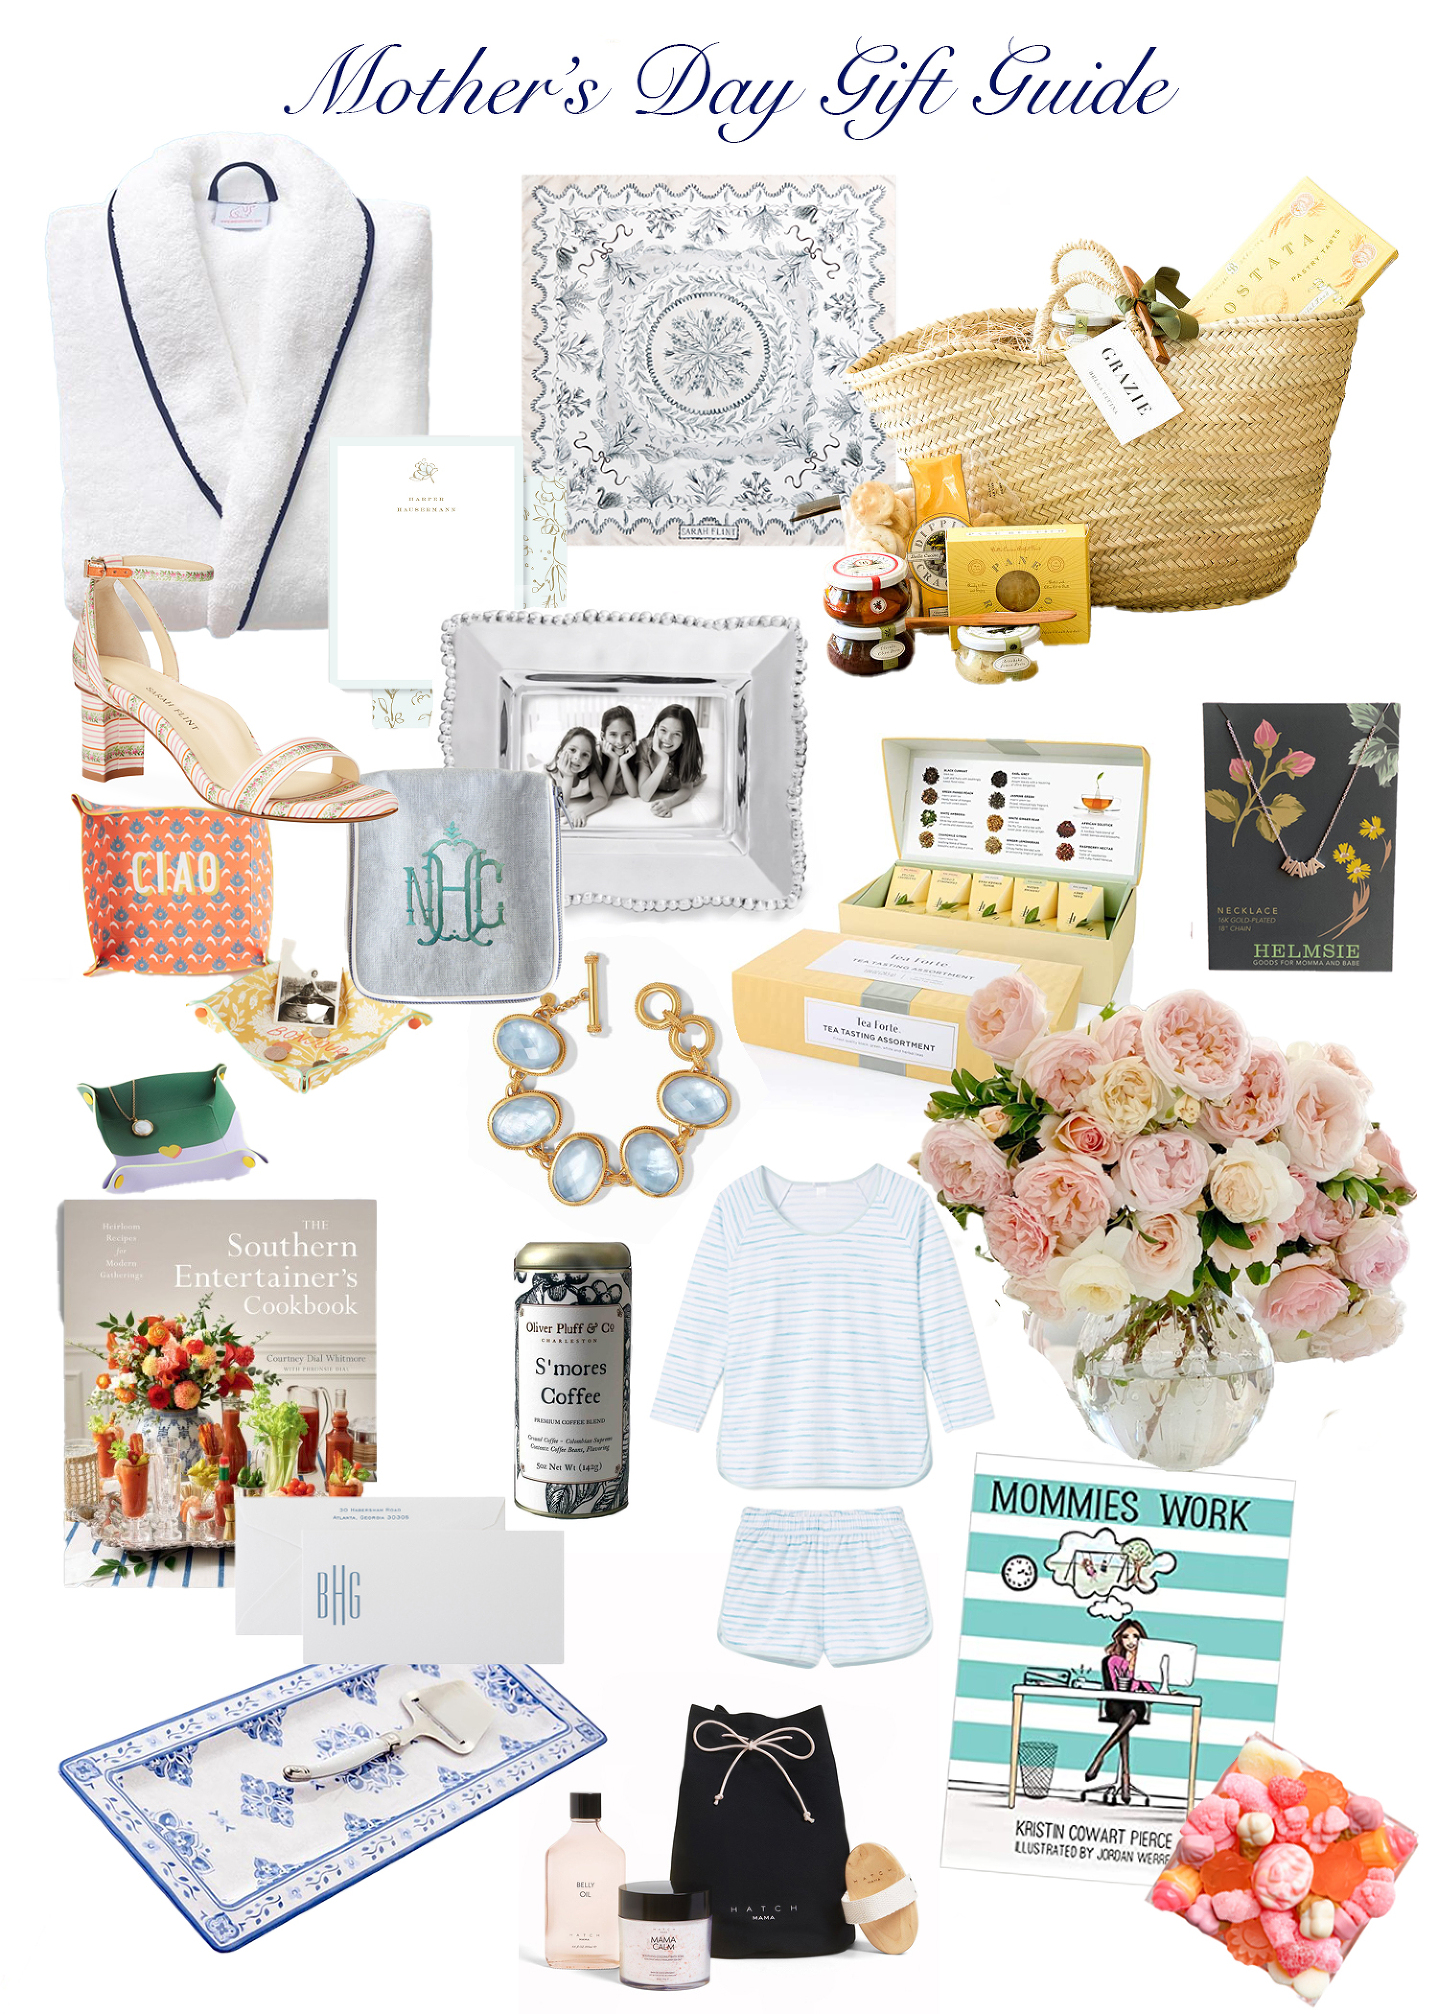 https://www.aliceparkphotography.com/wp-content/uploads/2021/04/27-6799-post/Mothers-day-giftguide(pp_w1438_h2014).jpg